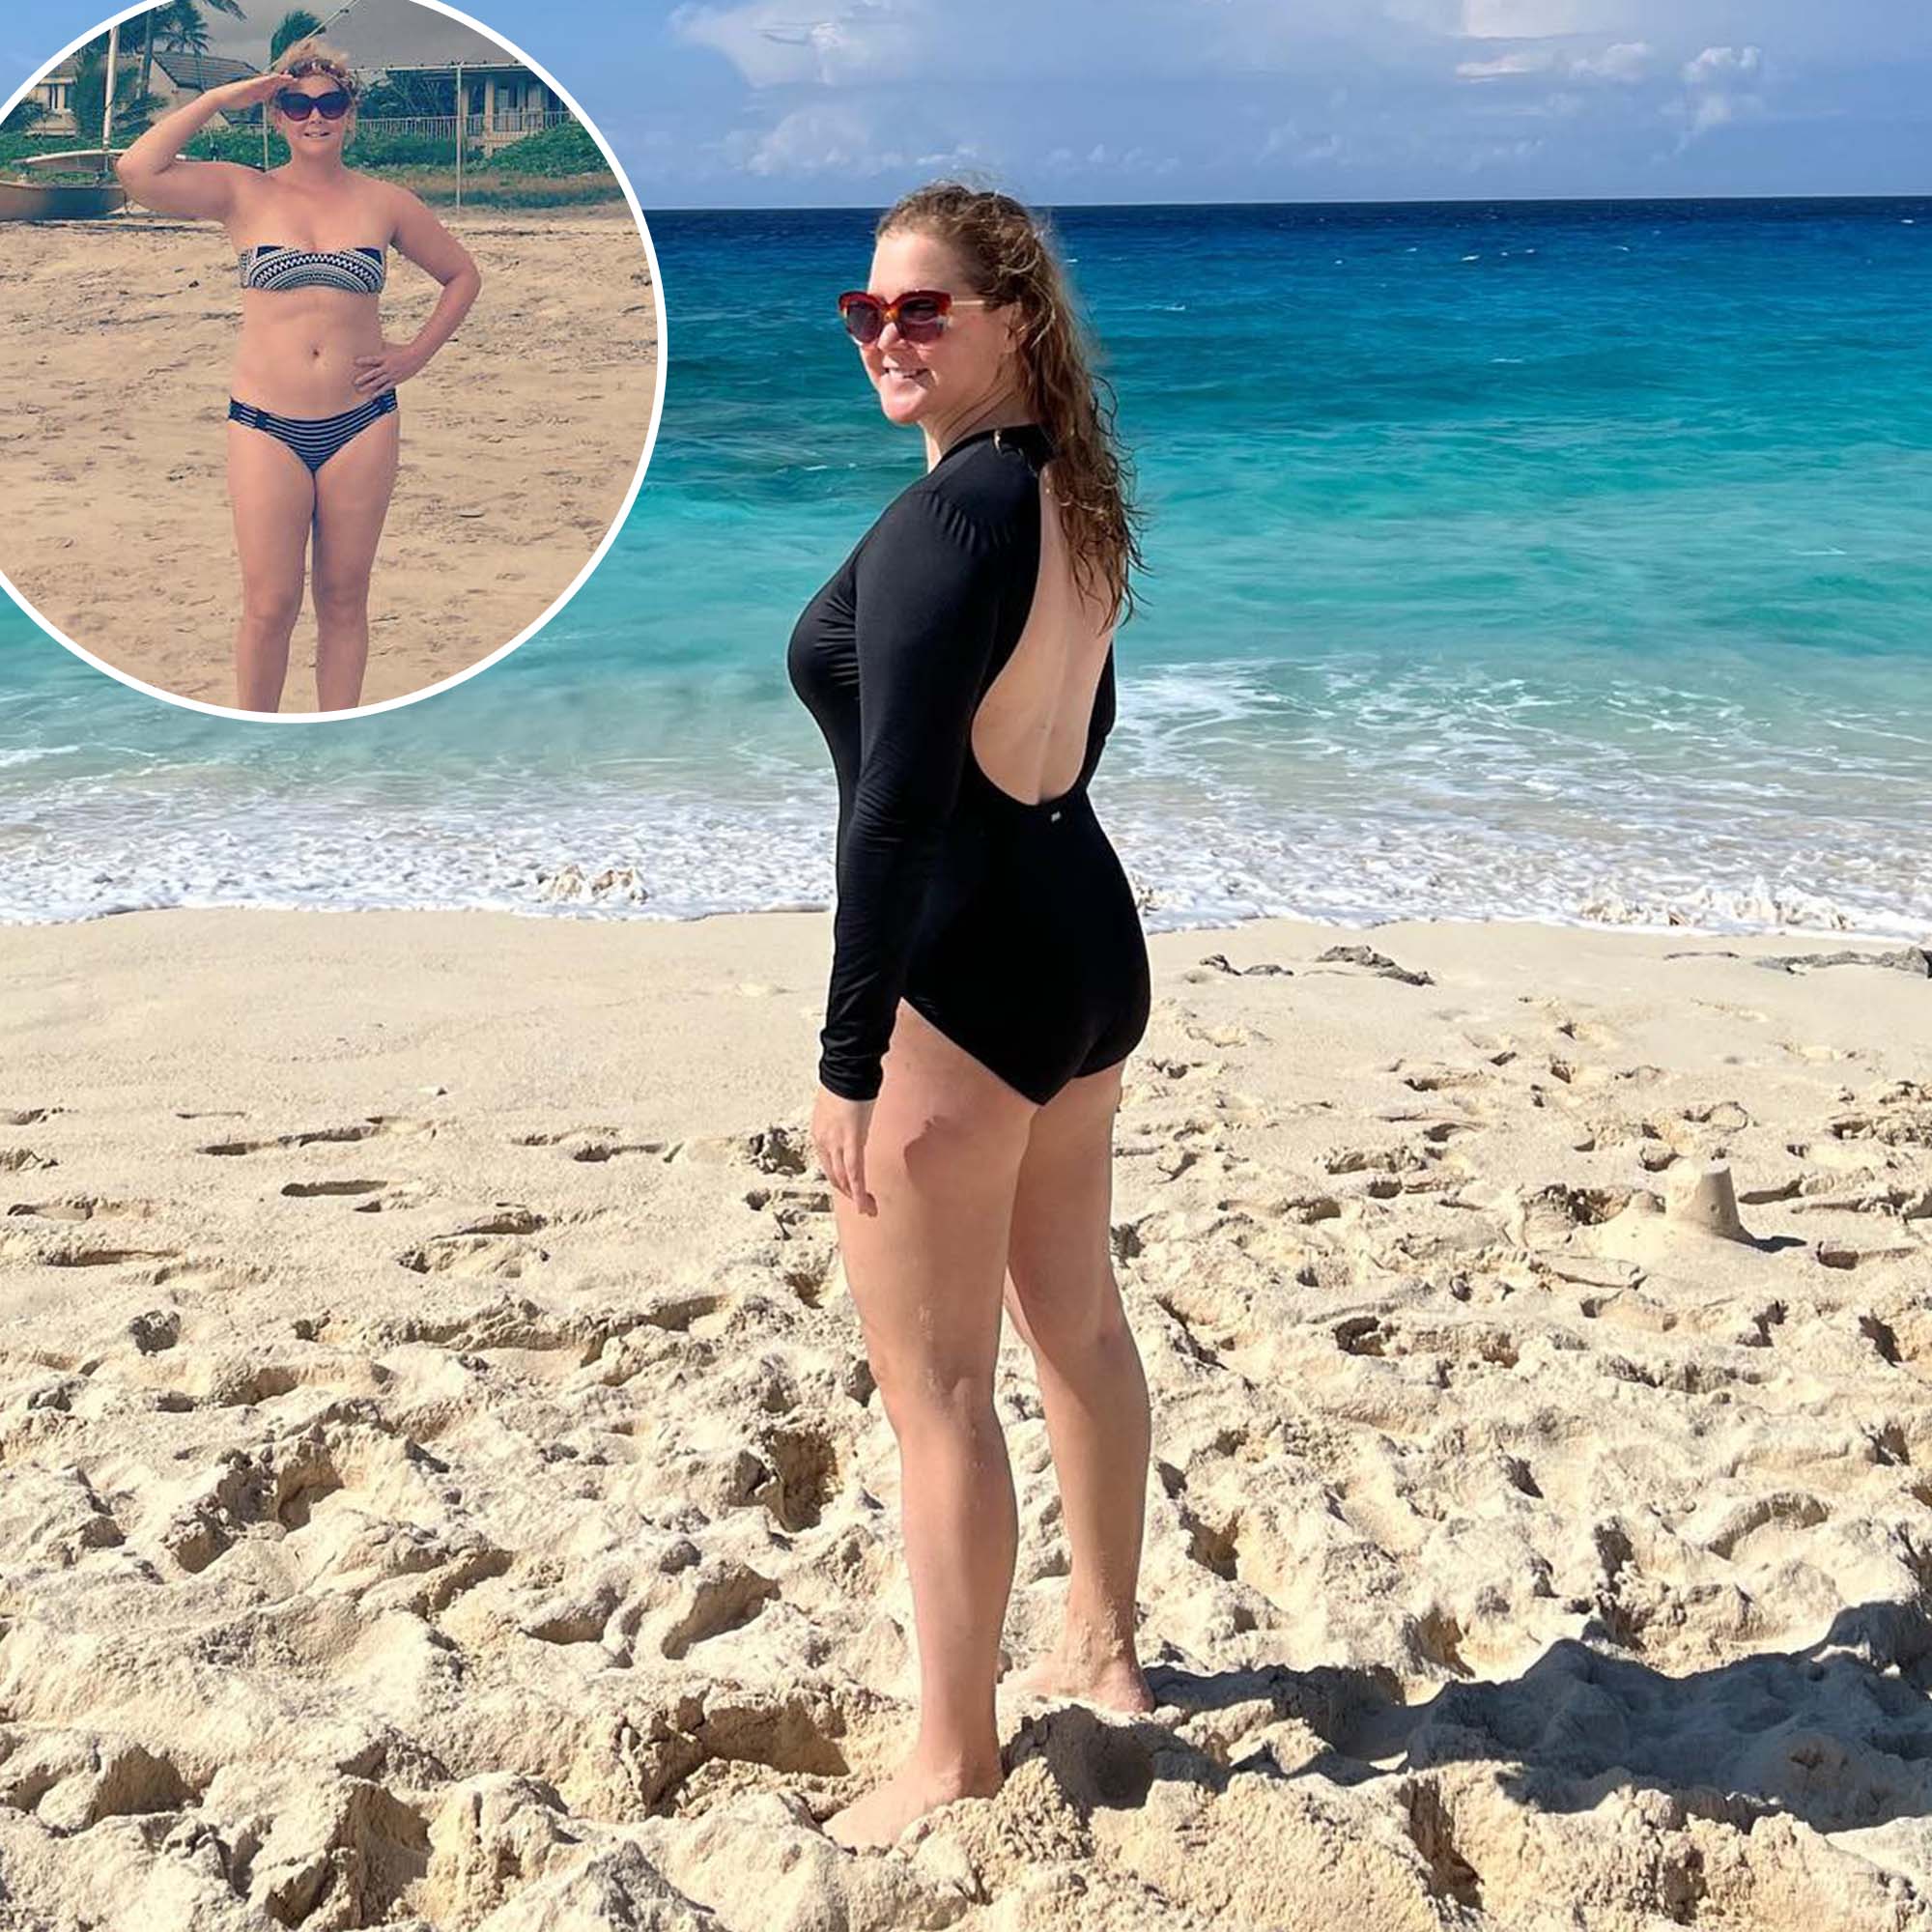 Fat In Nude Beach - Amy Schumer's Swimsuit Photos: See Bikinis, One-Pieces